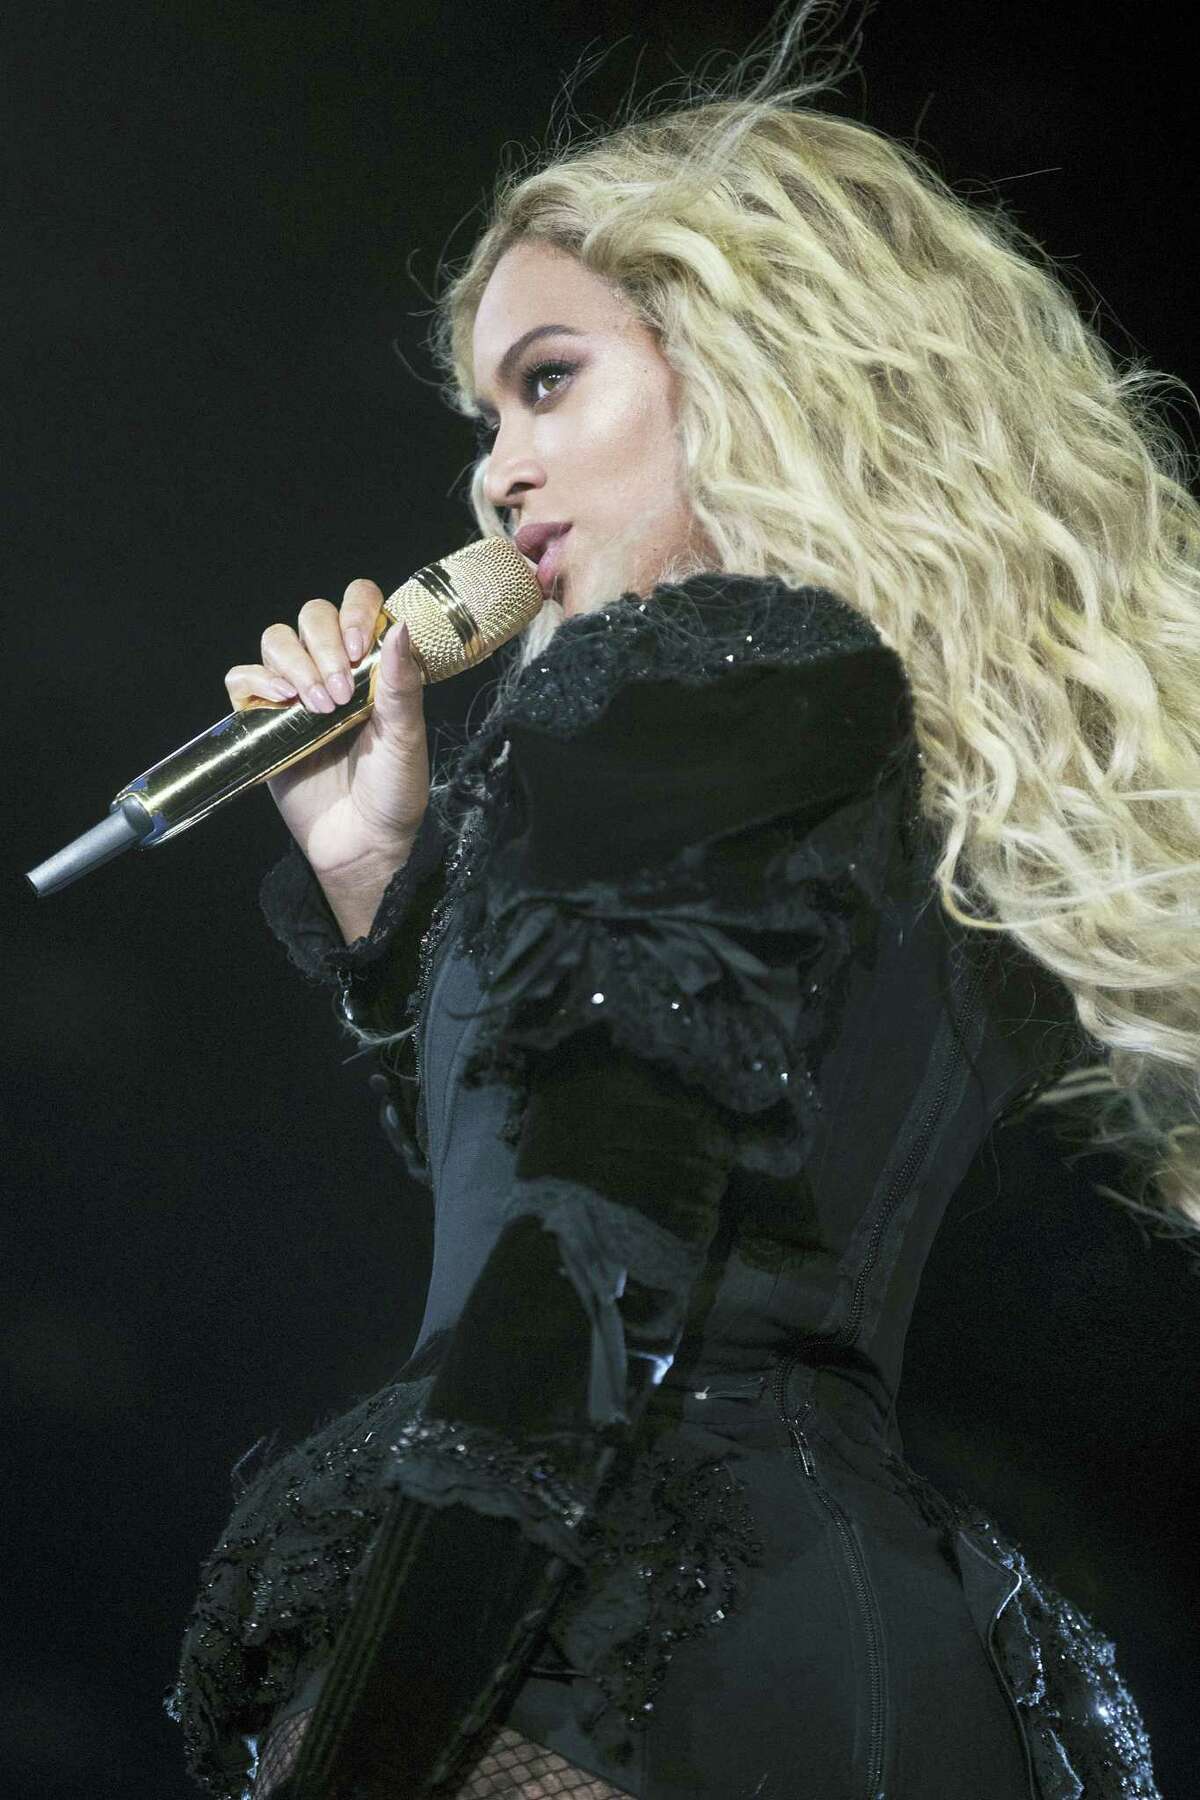 This photo taken Sept. 24, 20016 shows Beyonce performing during the Formation World Tour at Mercedes-Benz Superdome, in New Orleans. Beyoncé wrapped up her “Formation World Tour” with onstage assists from Jay Z, Kendrick Lamar and Serena Williams, while Hugh Jackman, Tyler Perry and Frank Ocean watched from the crowd.